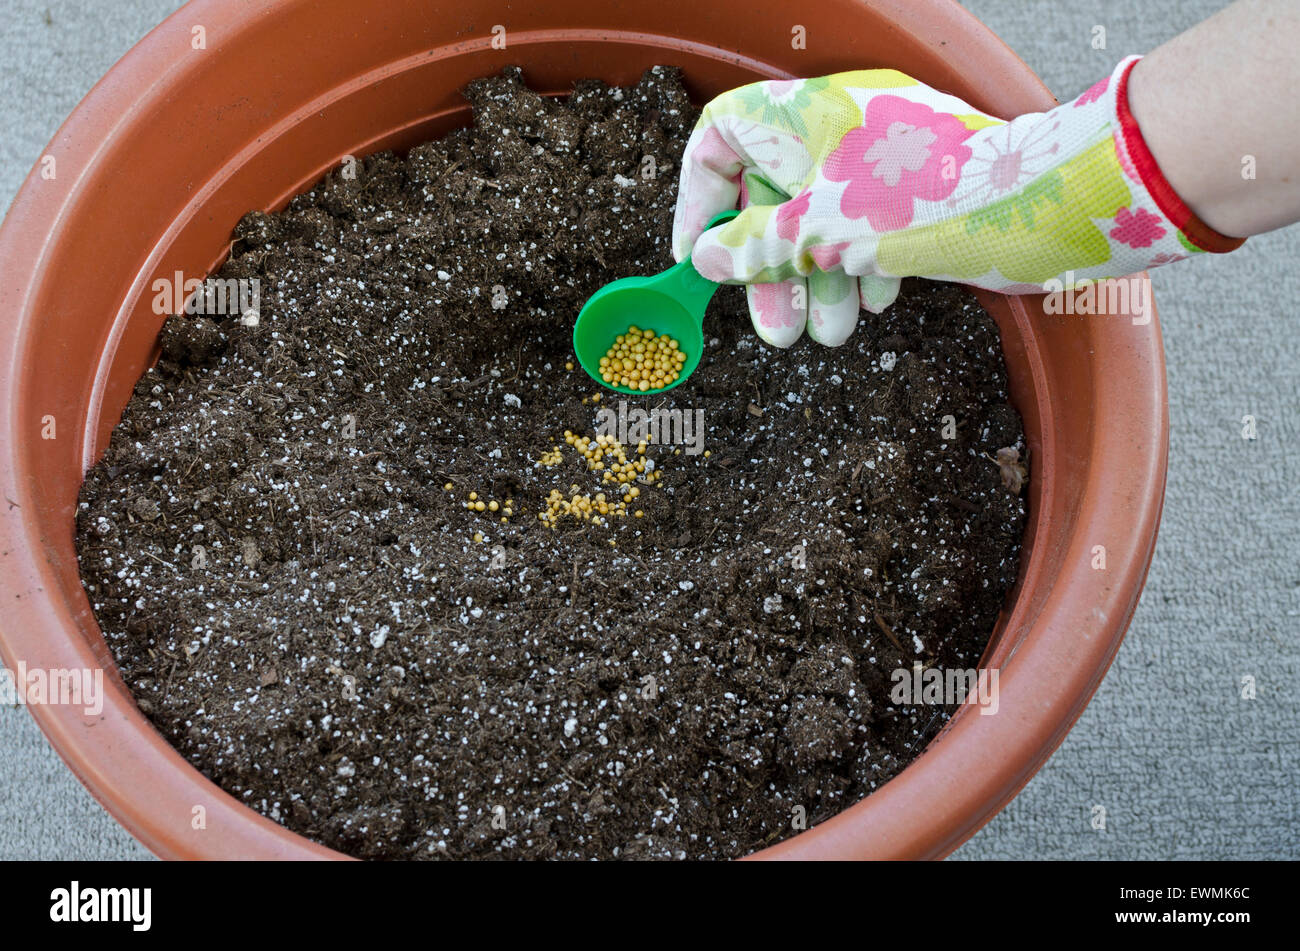 Container gardening, potting a plant.  Step 1 of: adding controlled release fertilizer pellets to the potting soil.  Model released. Stock Photo